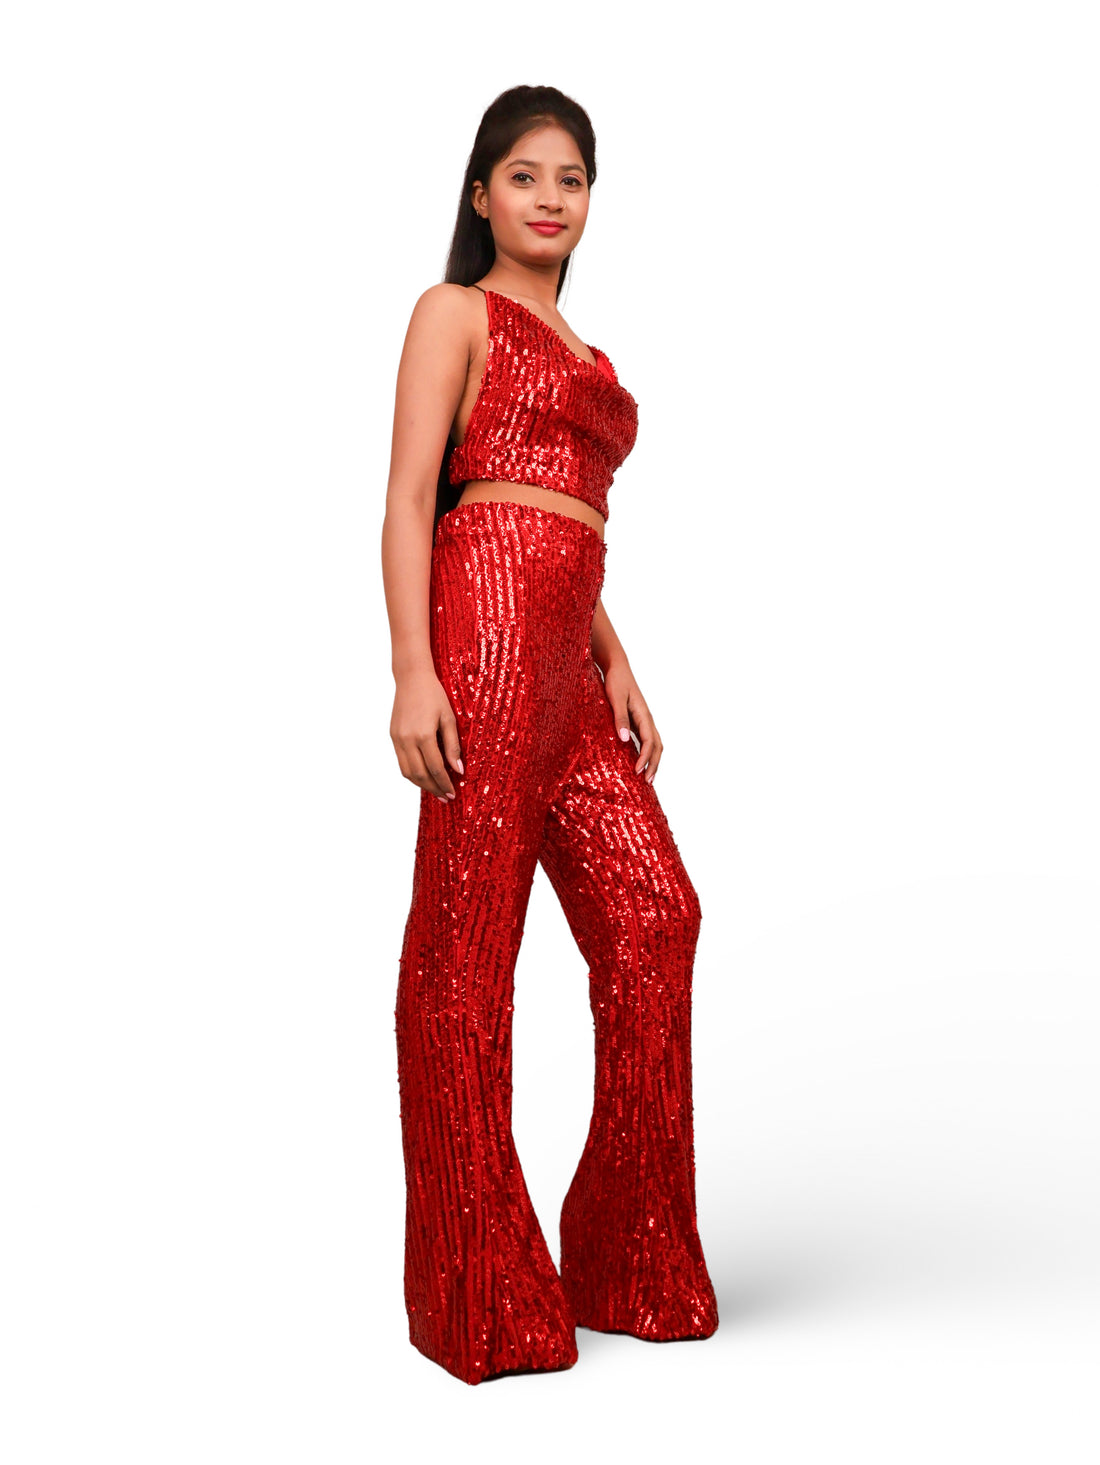 Sequins Spaghetti Neck Co-Ord Set by Shreekama Red Dress for Party Festival Wedding Occasion in Noida